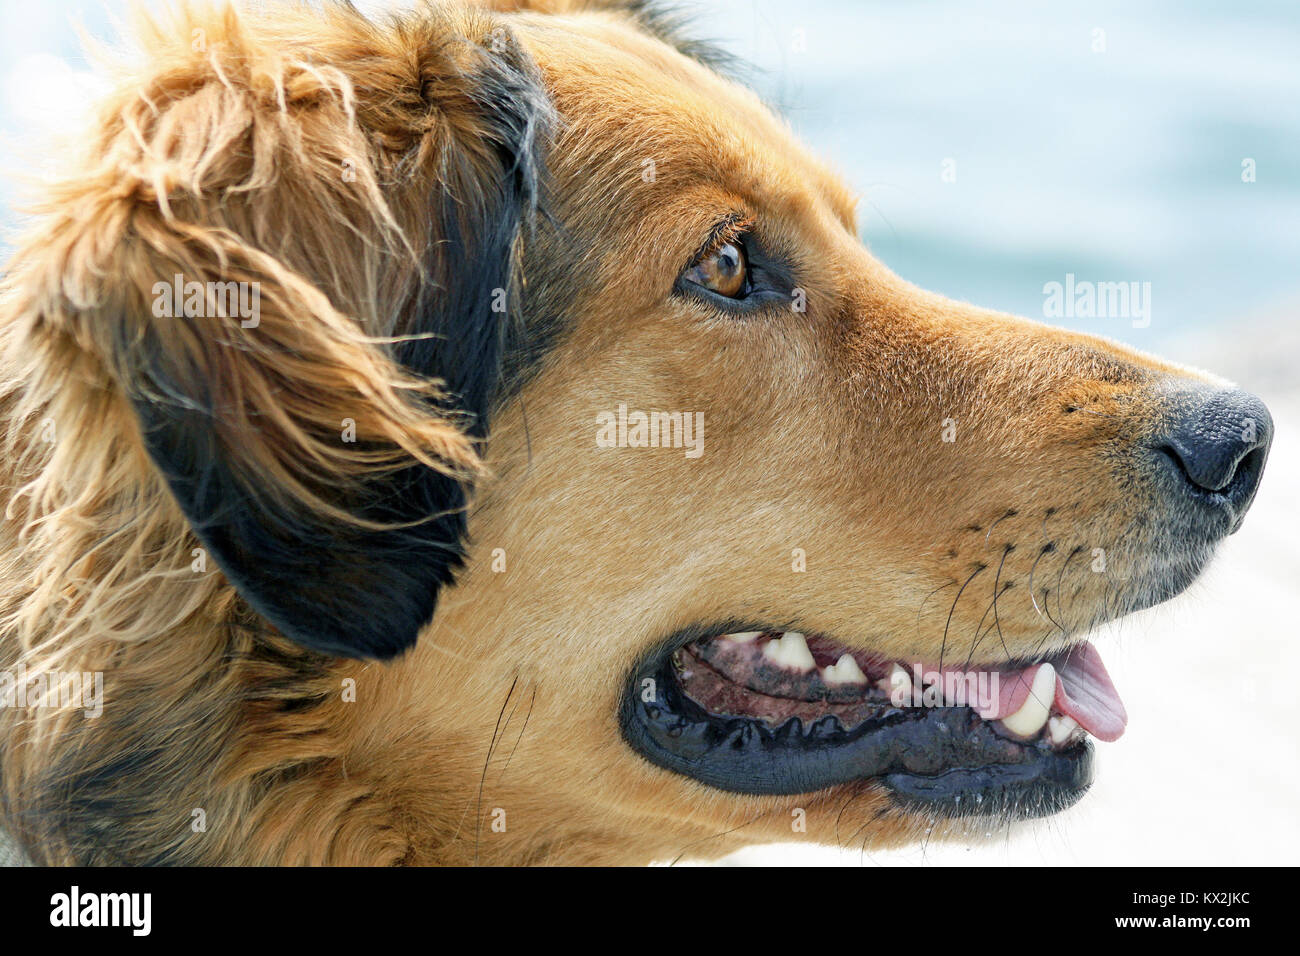 Dog with expressive eyes waiting happily and anticipating the next command Stock Photo